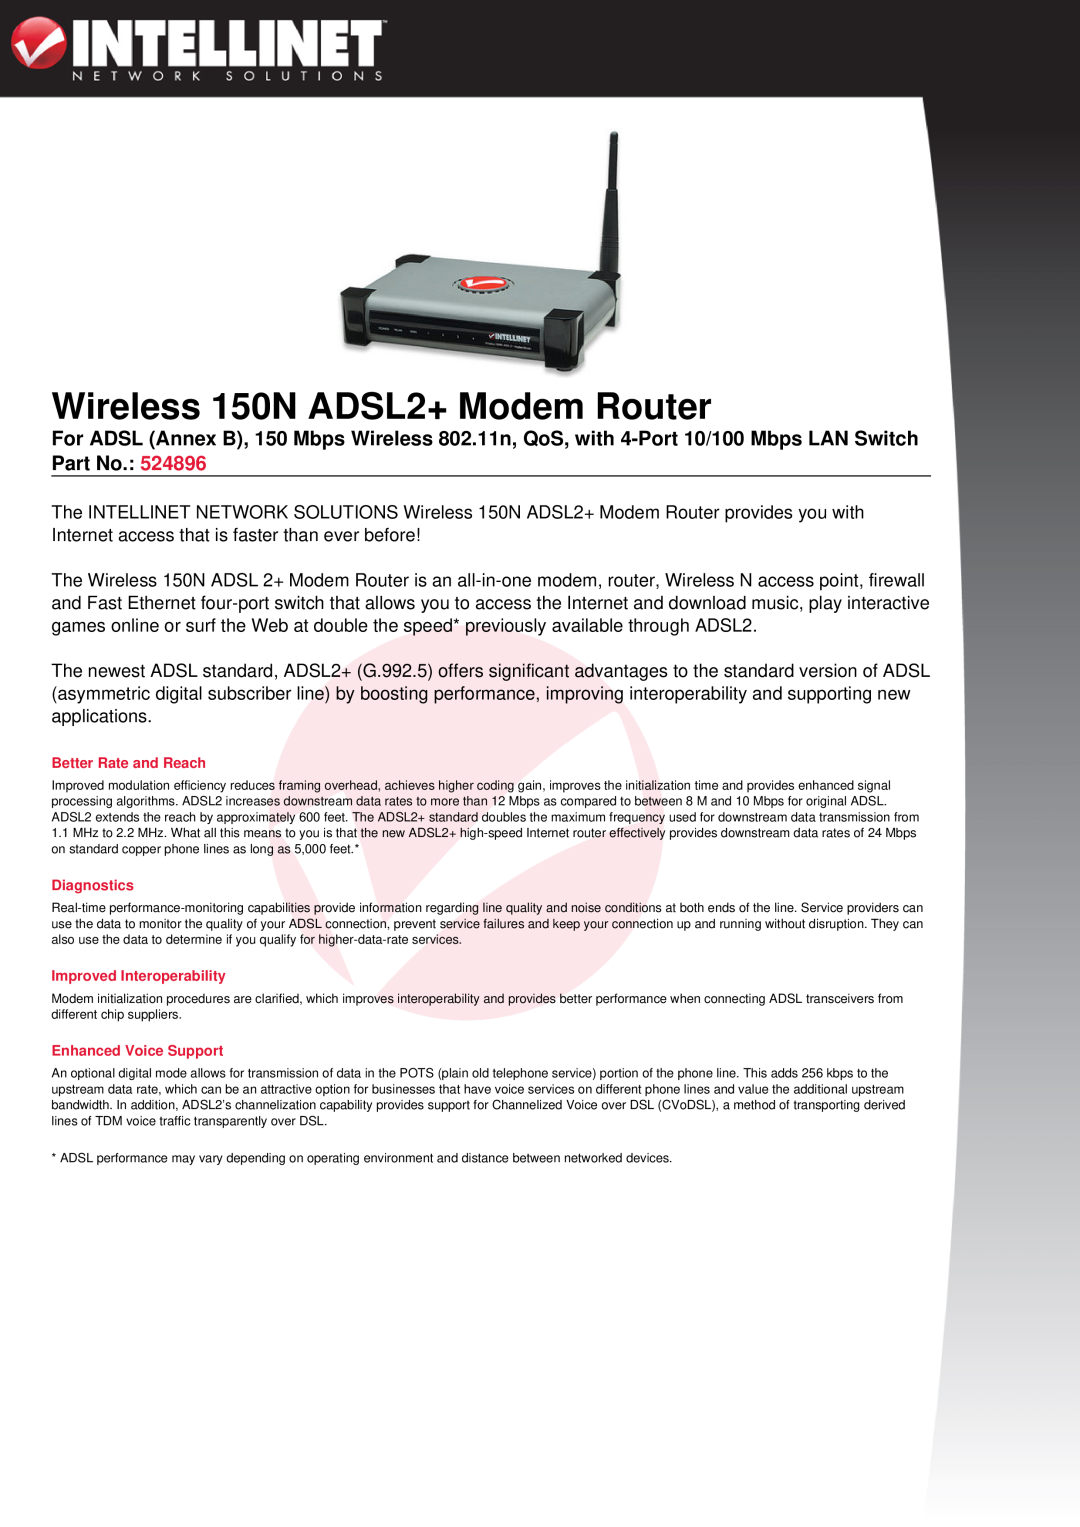 Intellinet Network Solutions manual Wireless 150N ADSL2+ Modem Router, Better Rate and Reach, Diagnostics 